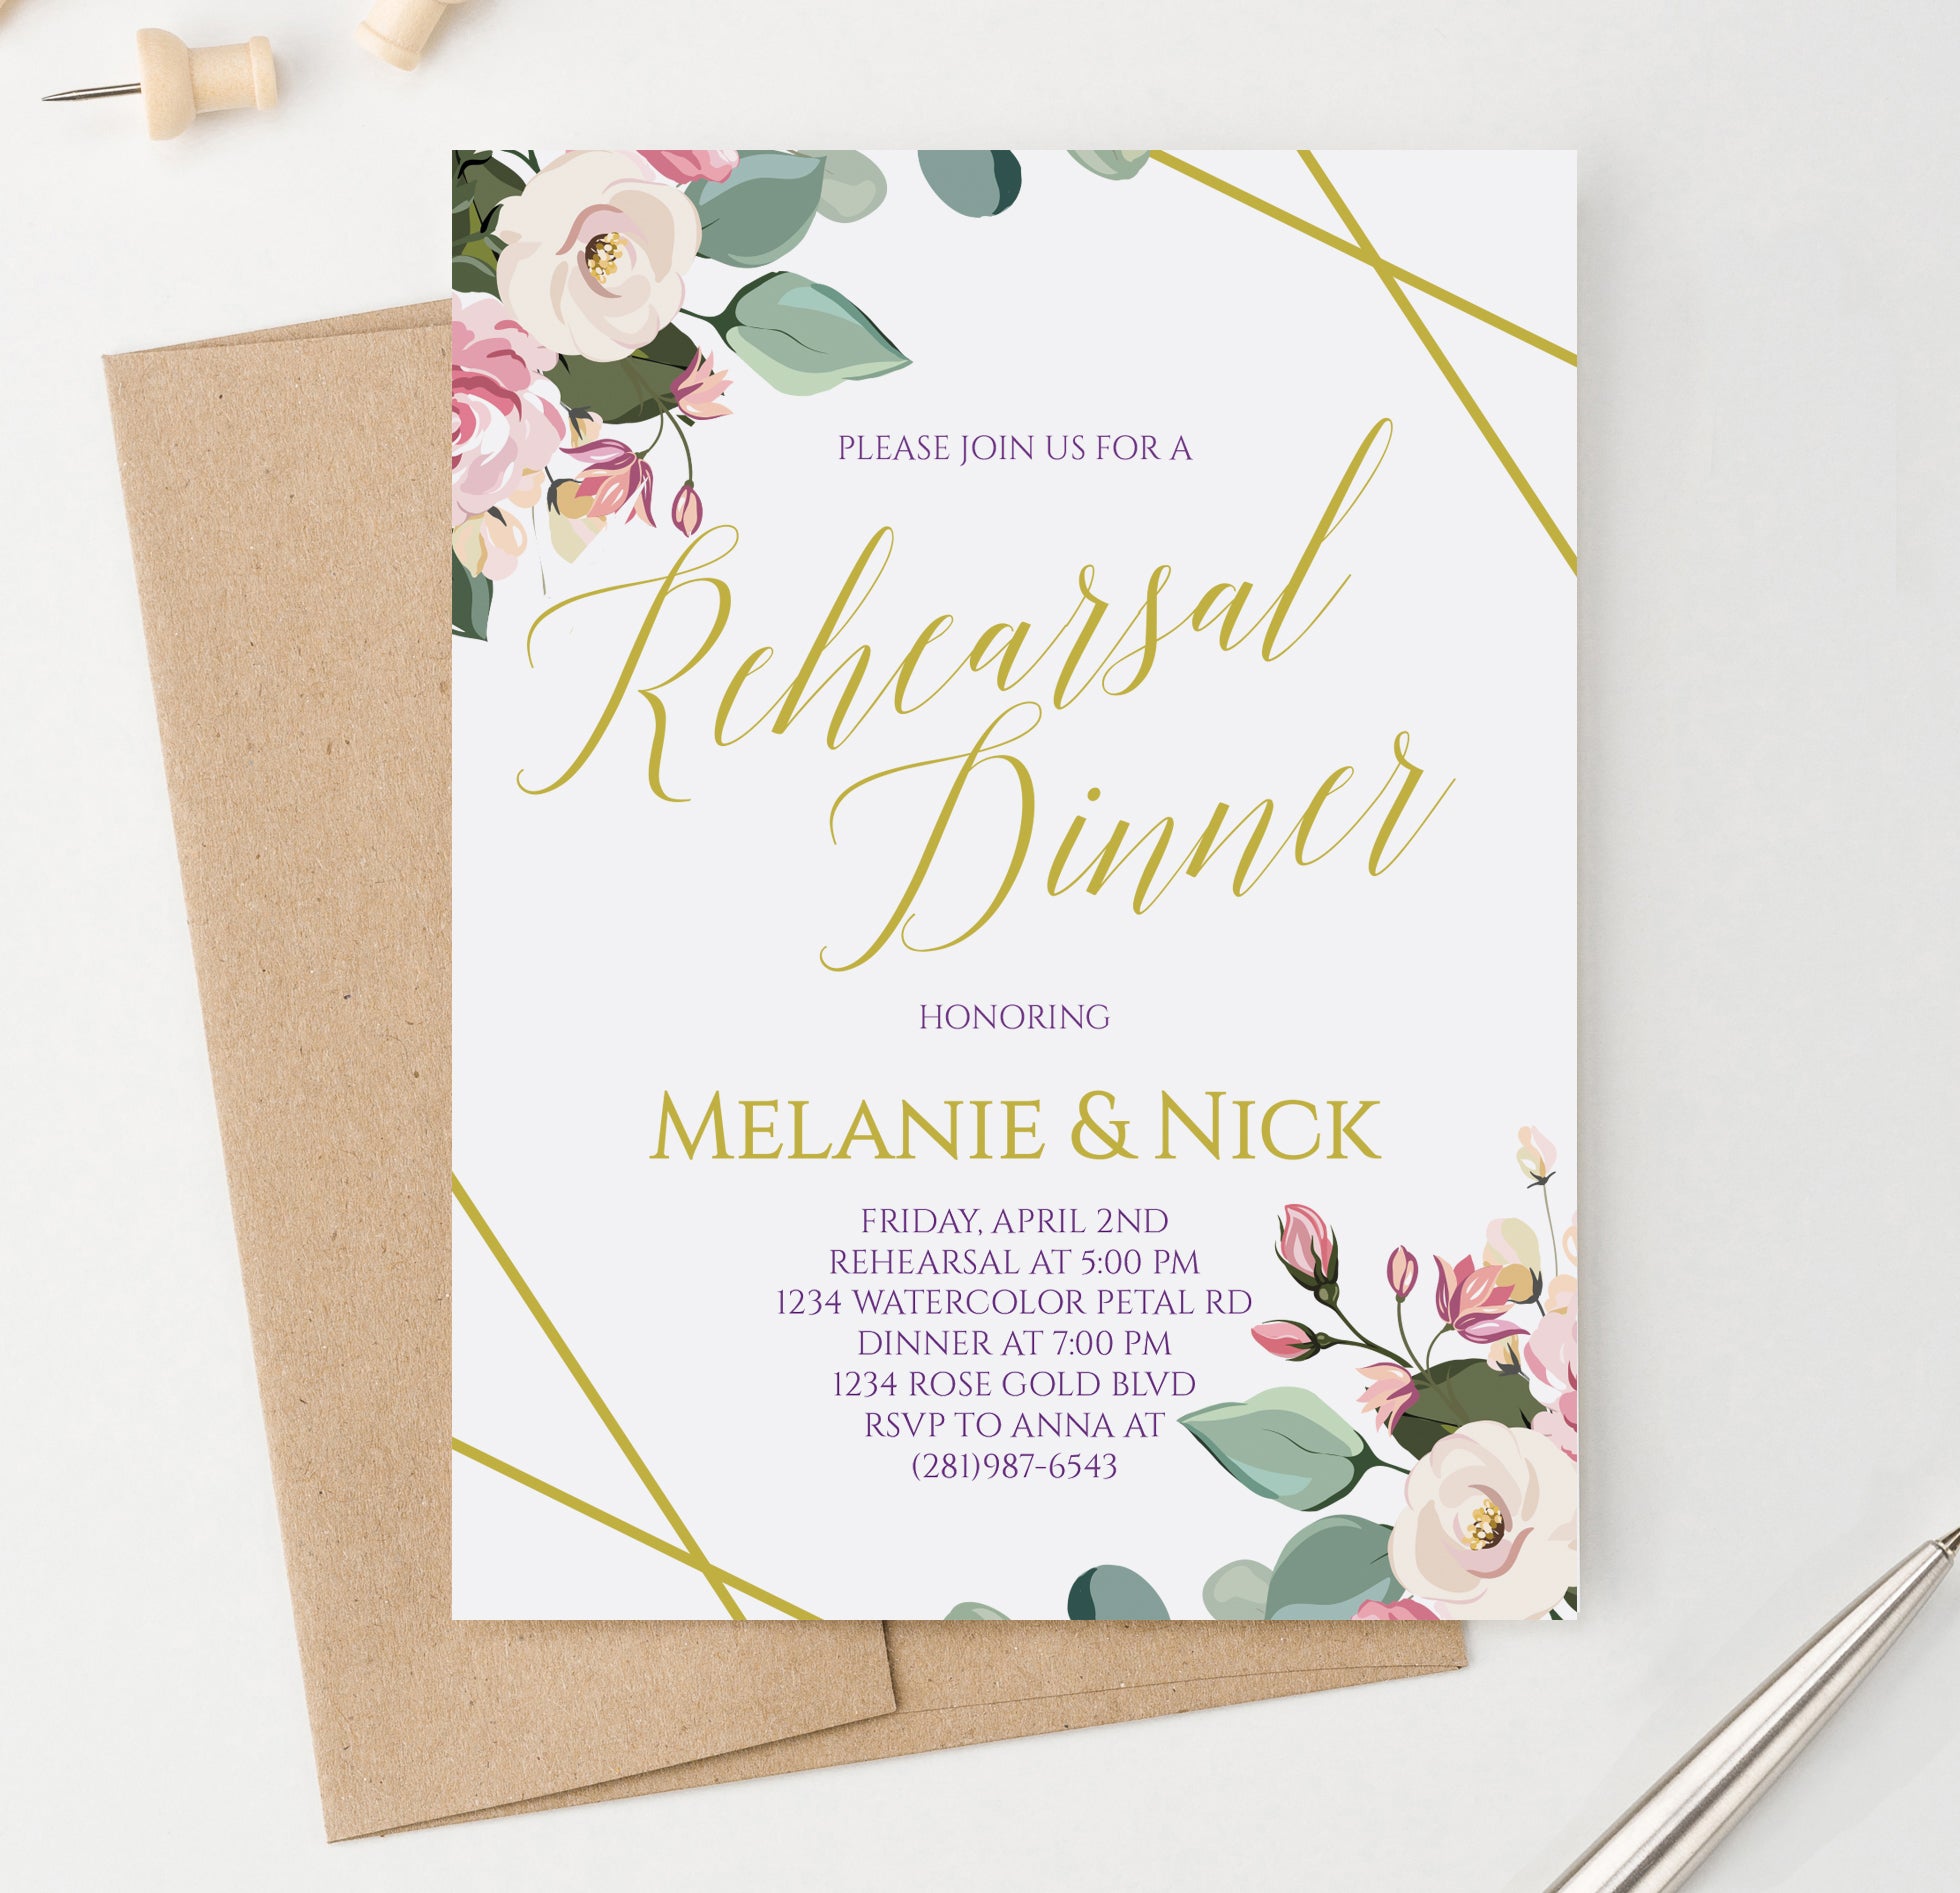 Personalized Modern Rehearsal Dinner Invitations With Floral Corners